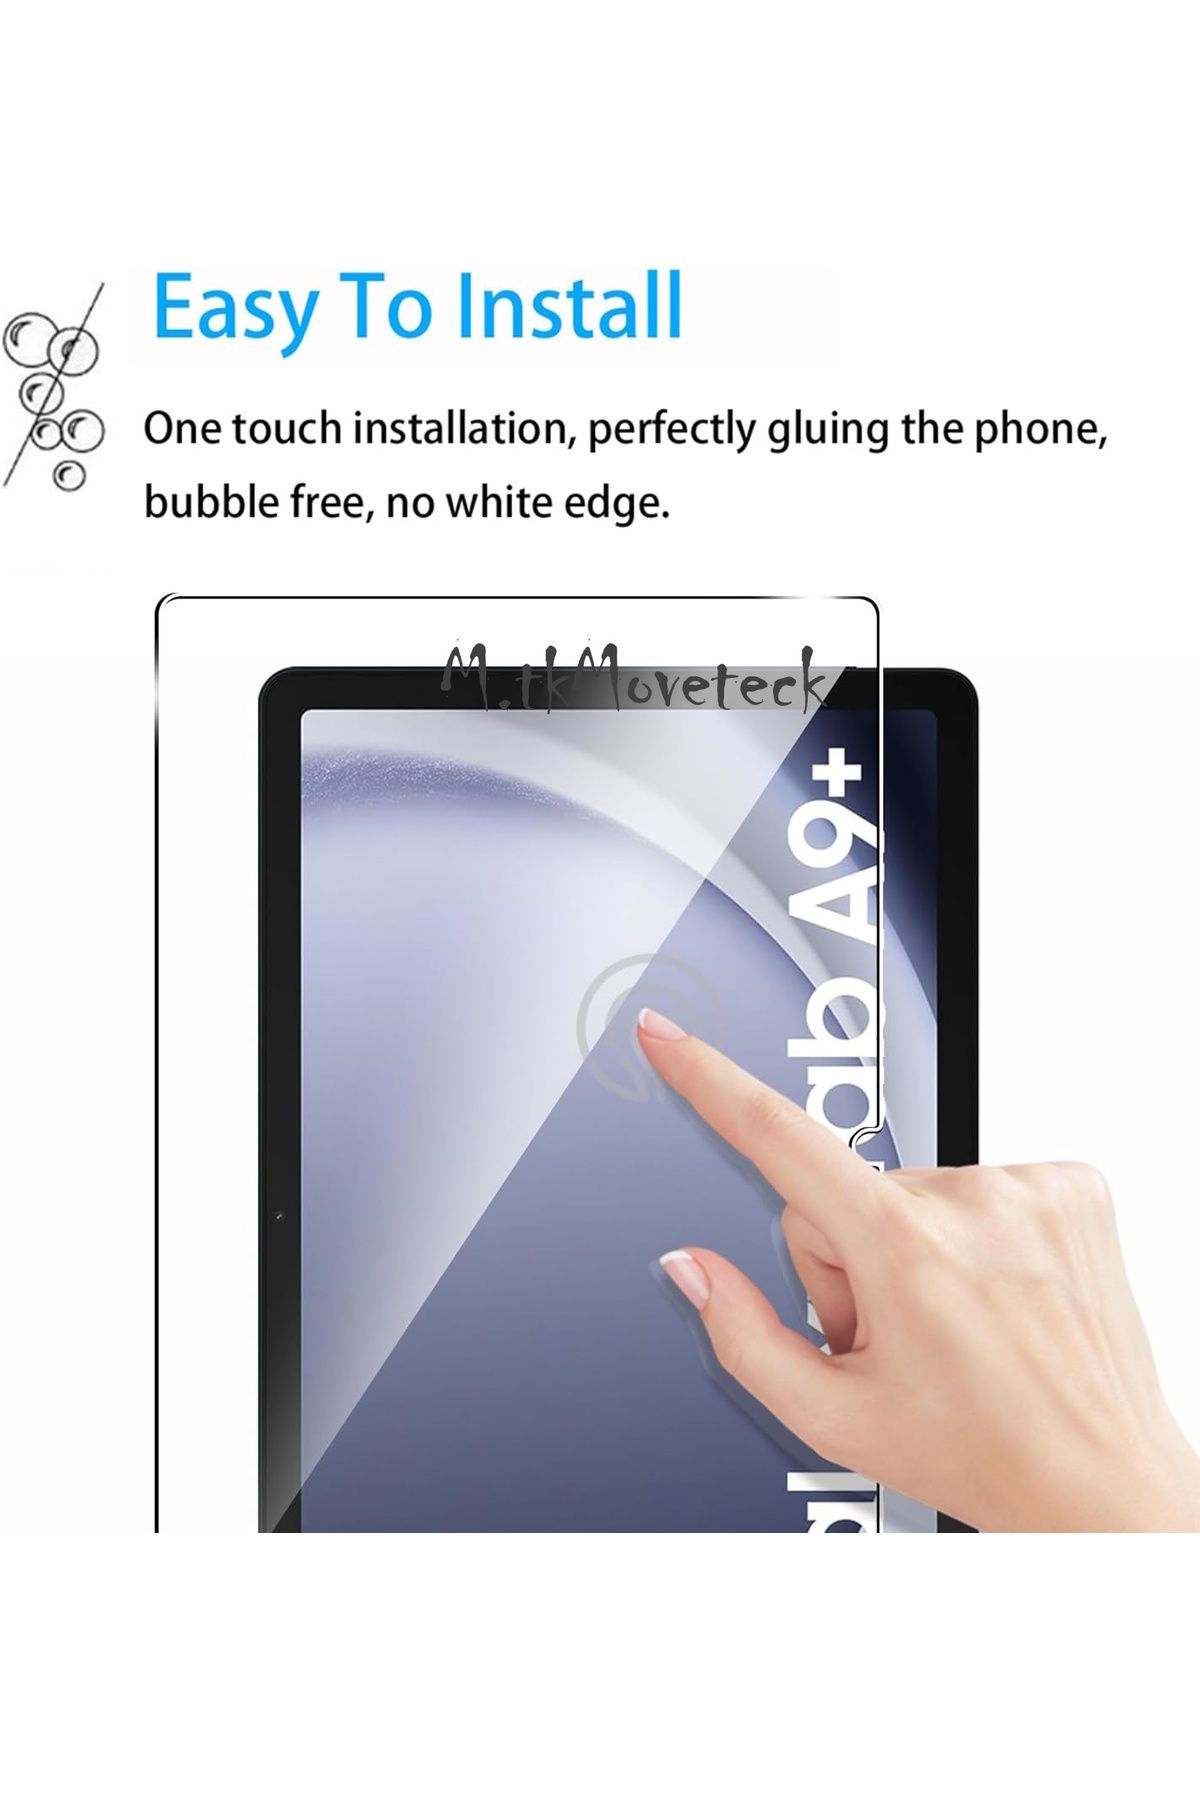 m.tk moveteck Samsung Galaxy Tab A9 Plus 11 Inch Compatible Case 360  Rotatable Stand Cover Screen Protector Sm-x210 - Trendyol